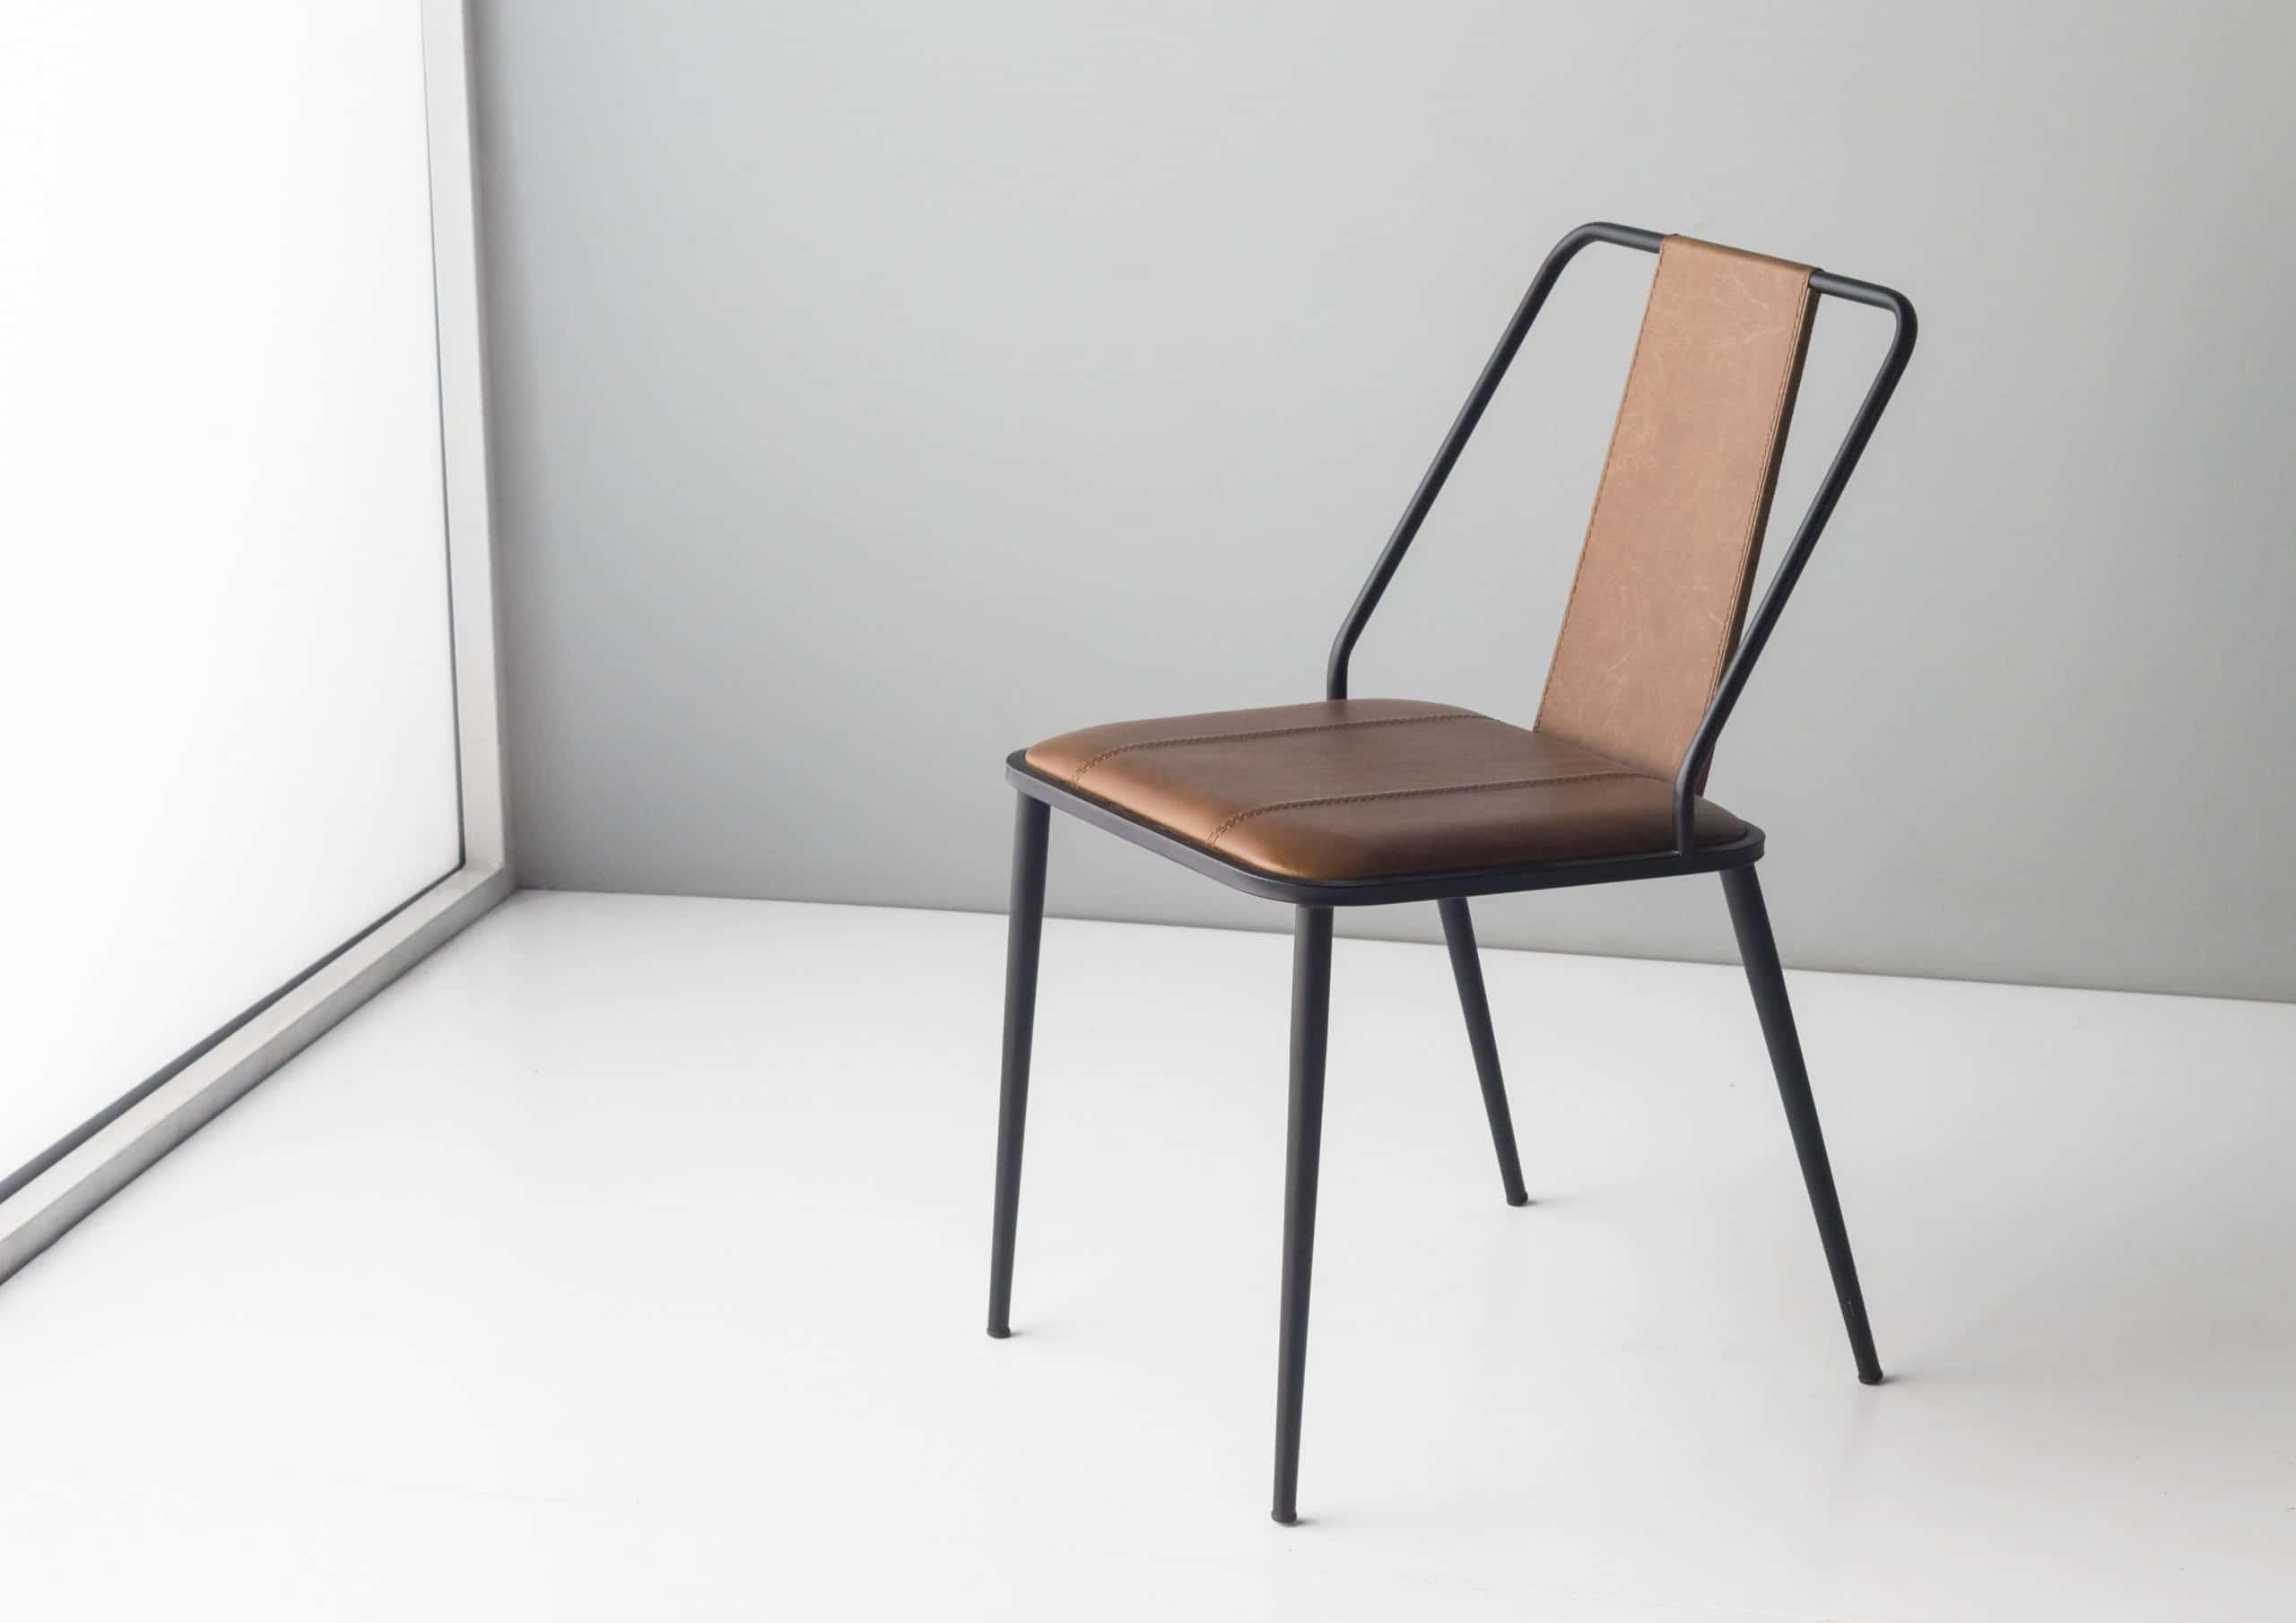 Mook Chair by Doimo Brasil
Dimensions: W 55 x D 46 x H 81 cm 
Materials: Metal, upholstered seat. 


With the intention of providing good taste and personality, Doimo deciphers trends and follows the evolution of man and his space. To this end, it